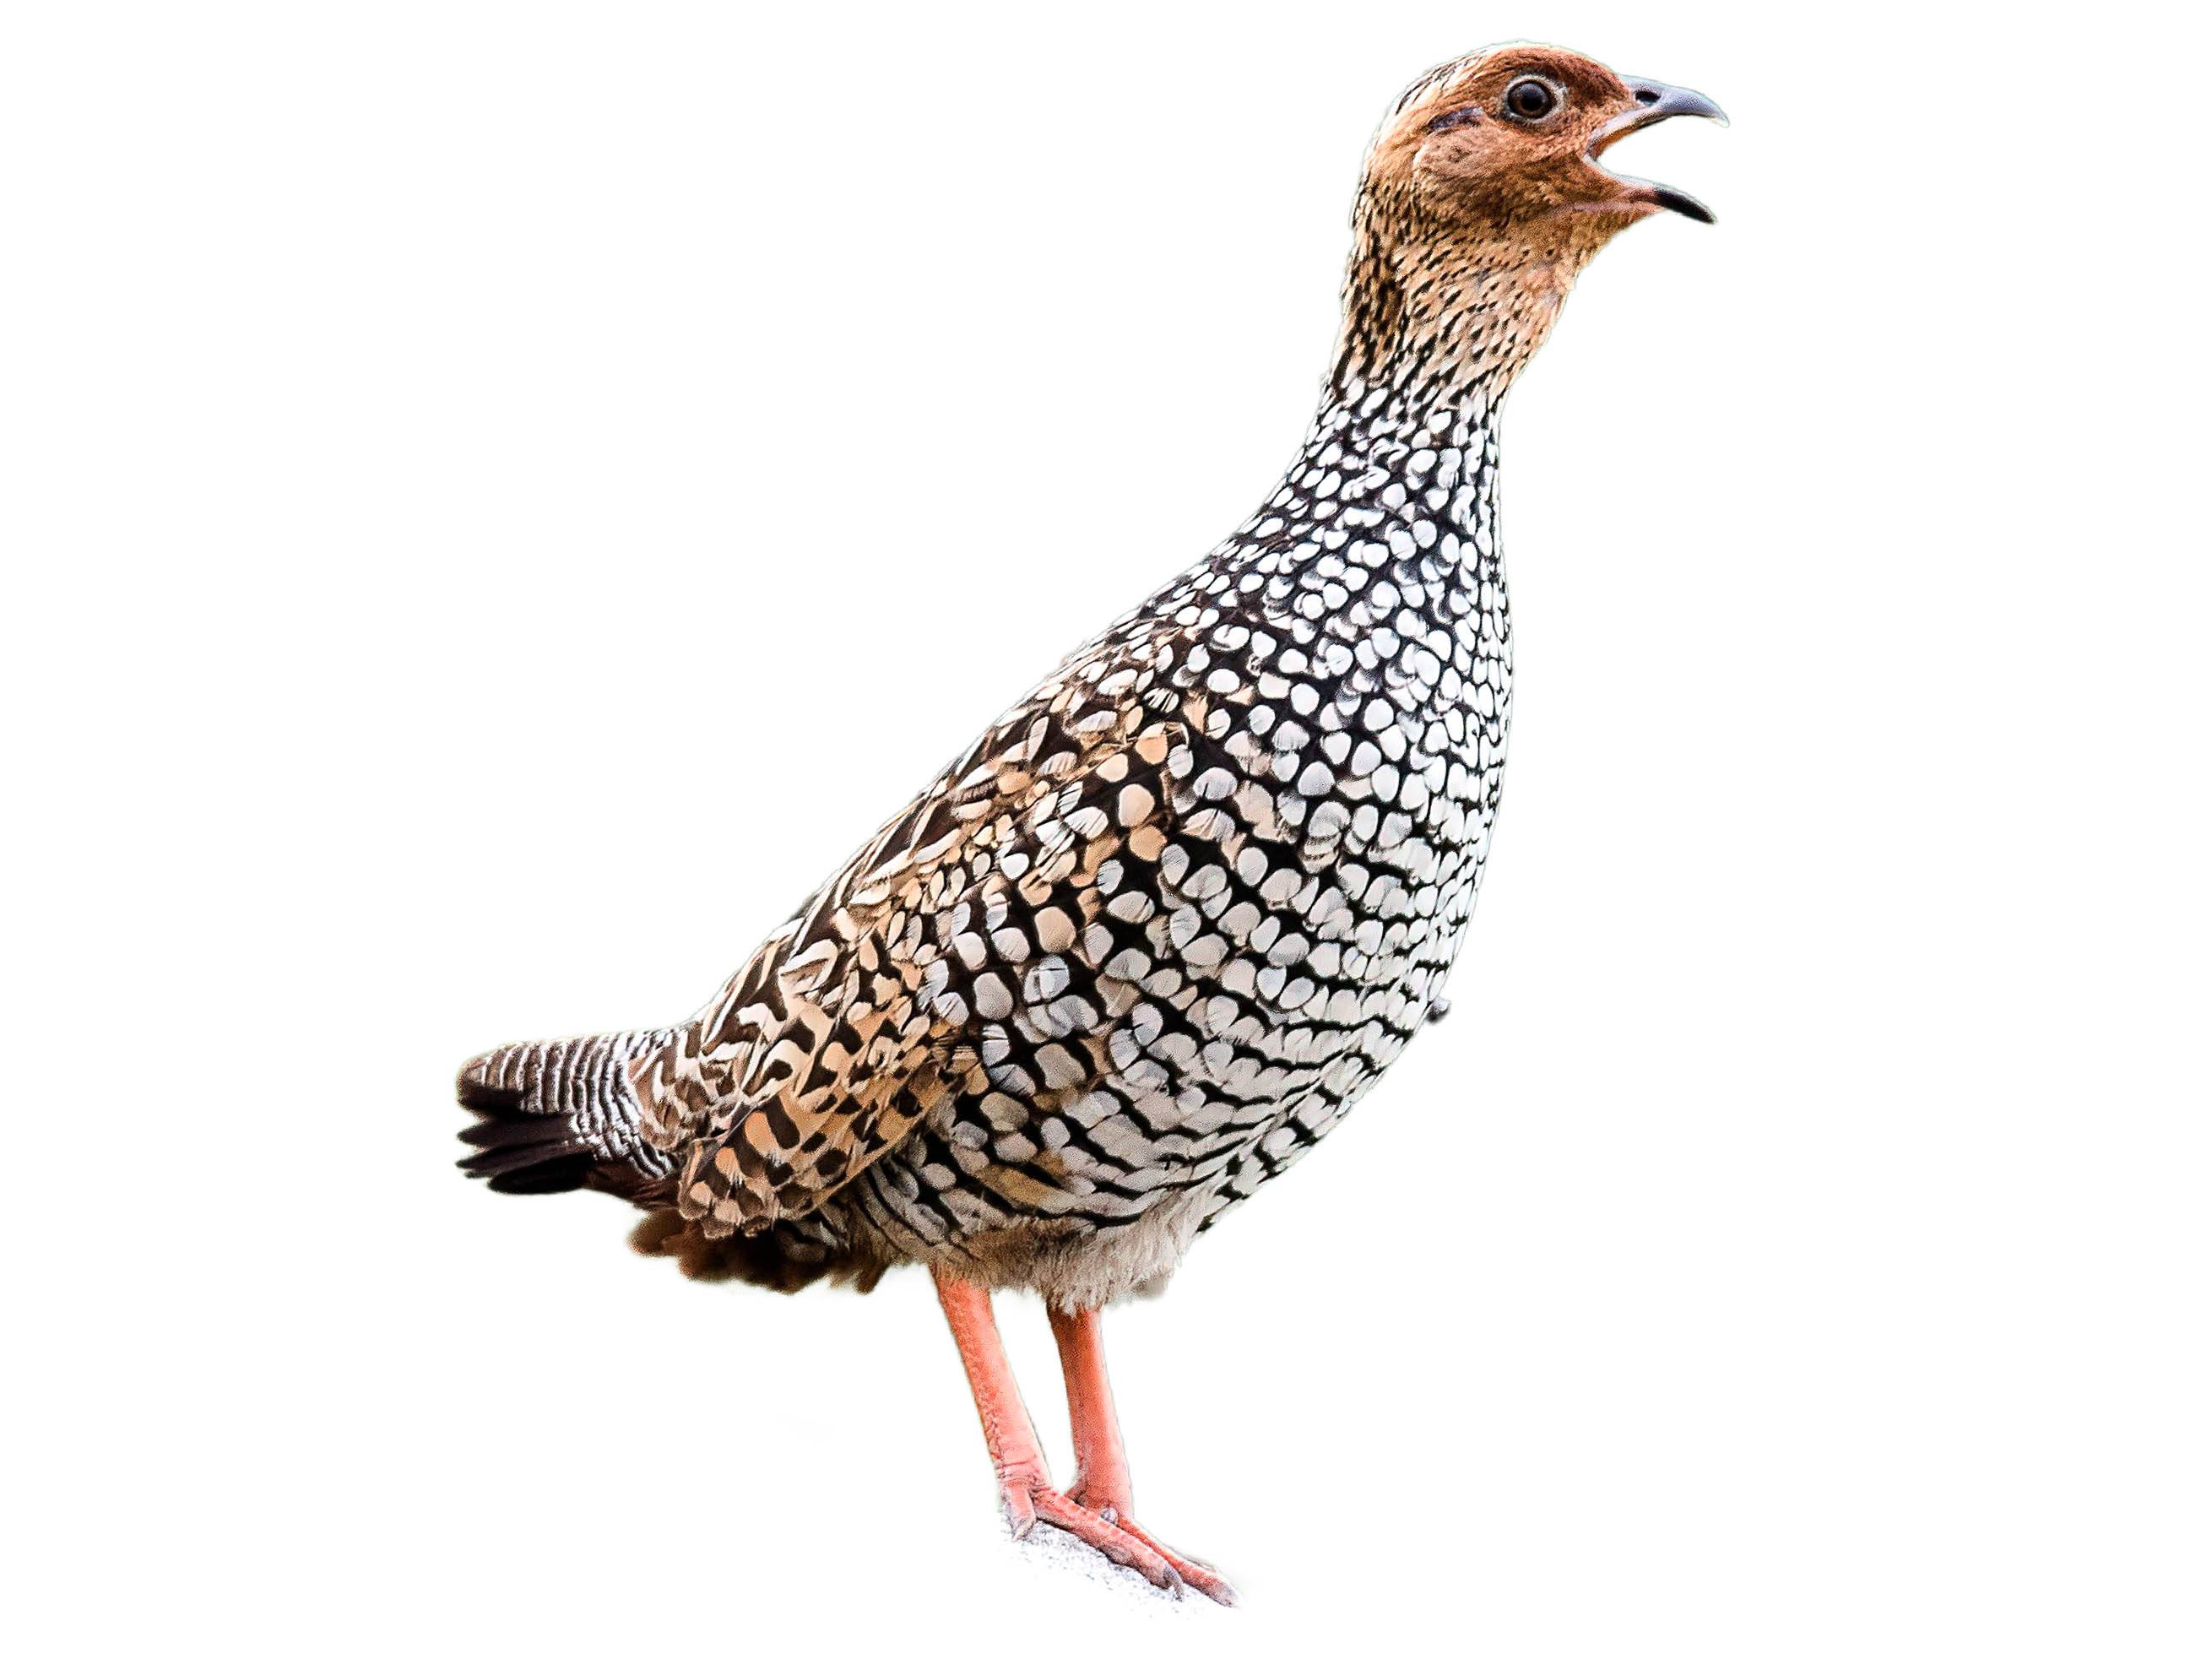 A photo of a Painted Francolin (Francolinus pictus)